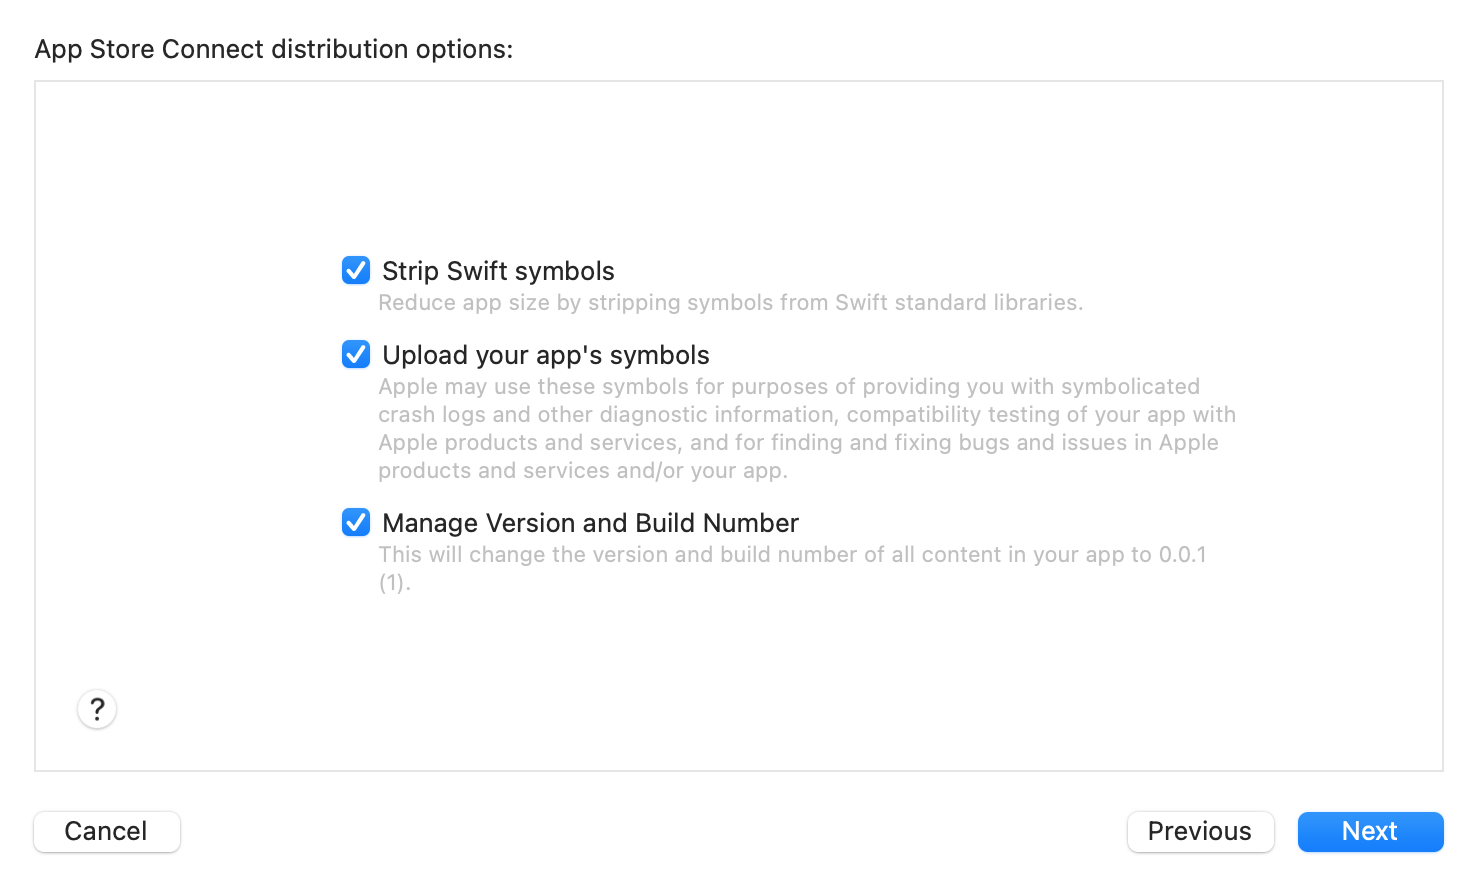 App Store Connect distribution options